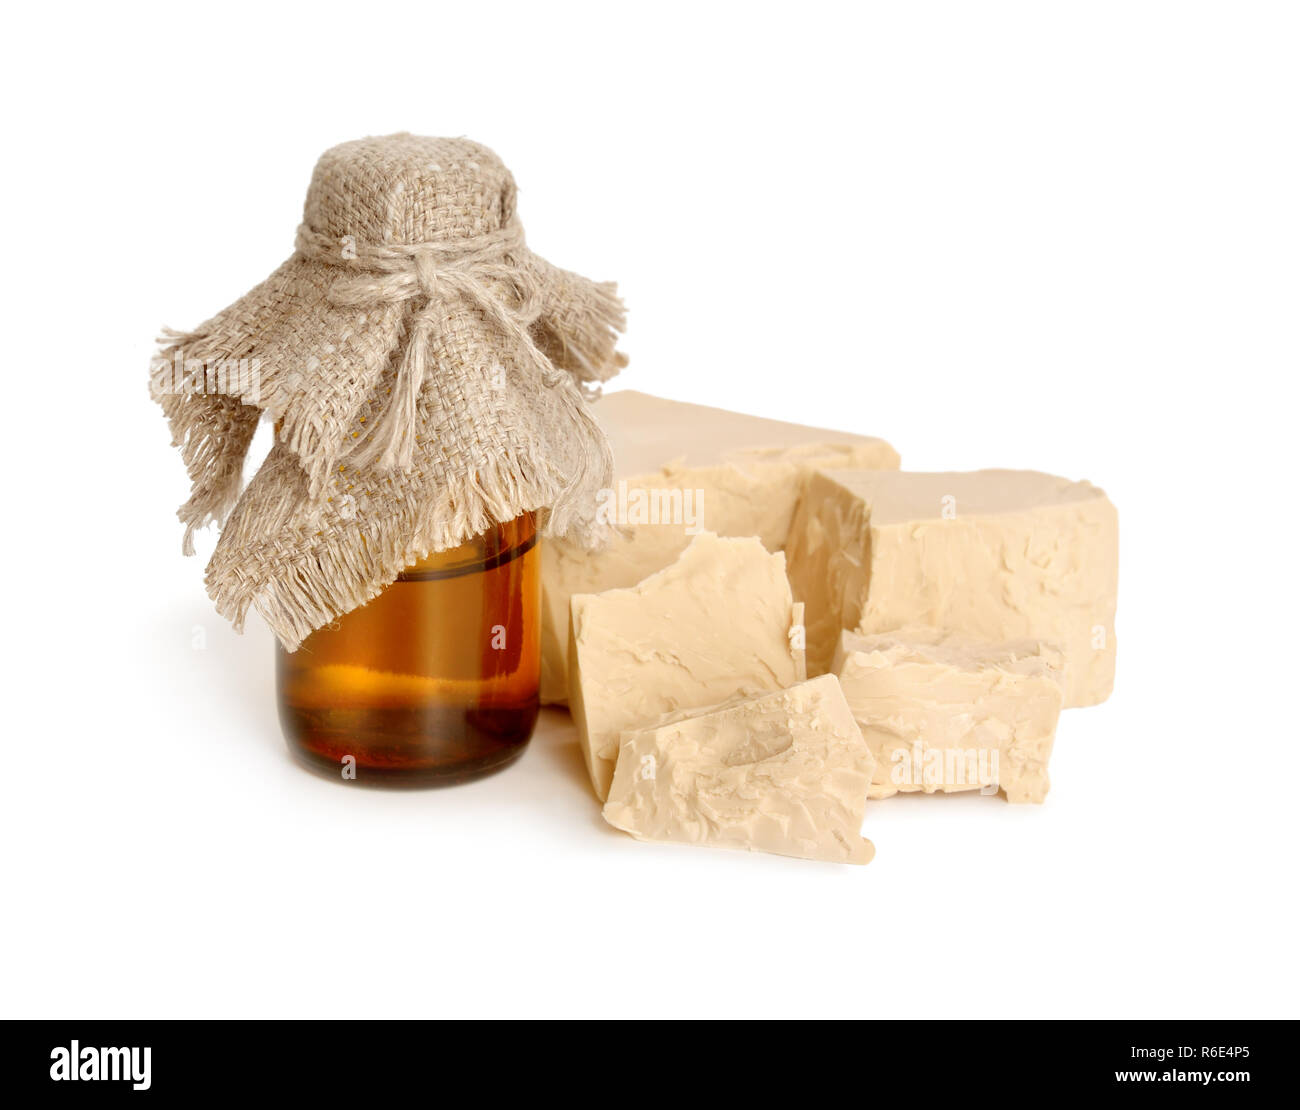 A block of compressed fresh yeast with pharmaceutical bottle. Stock Photo